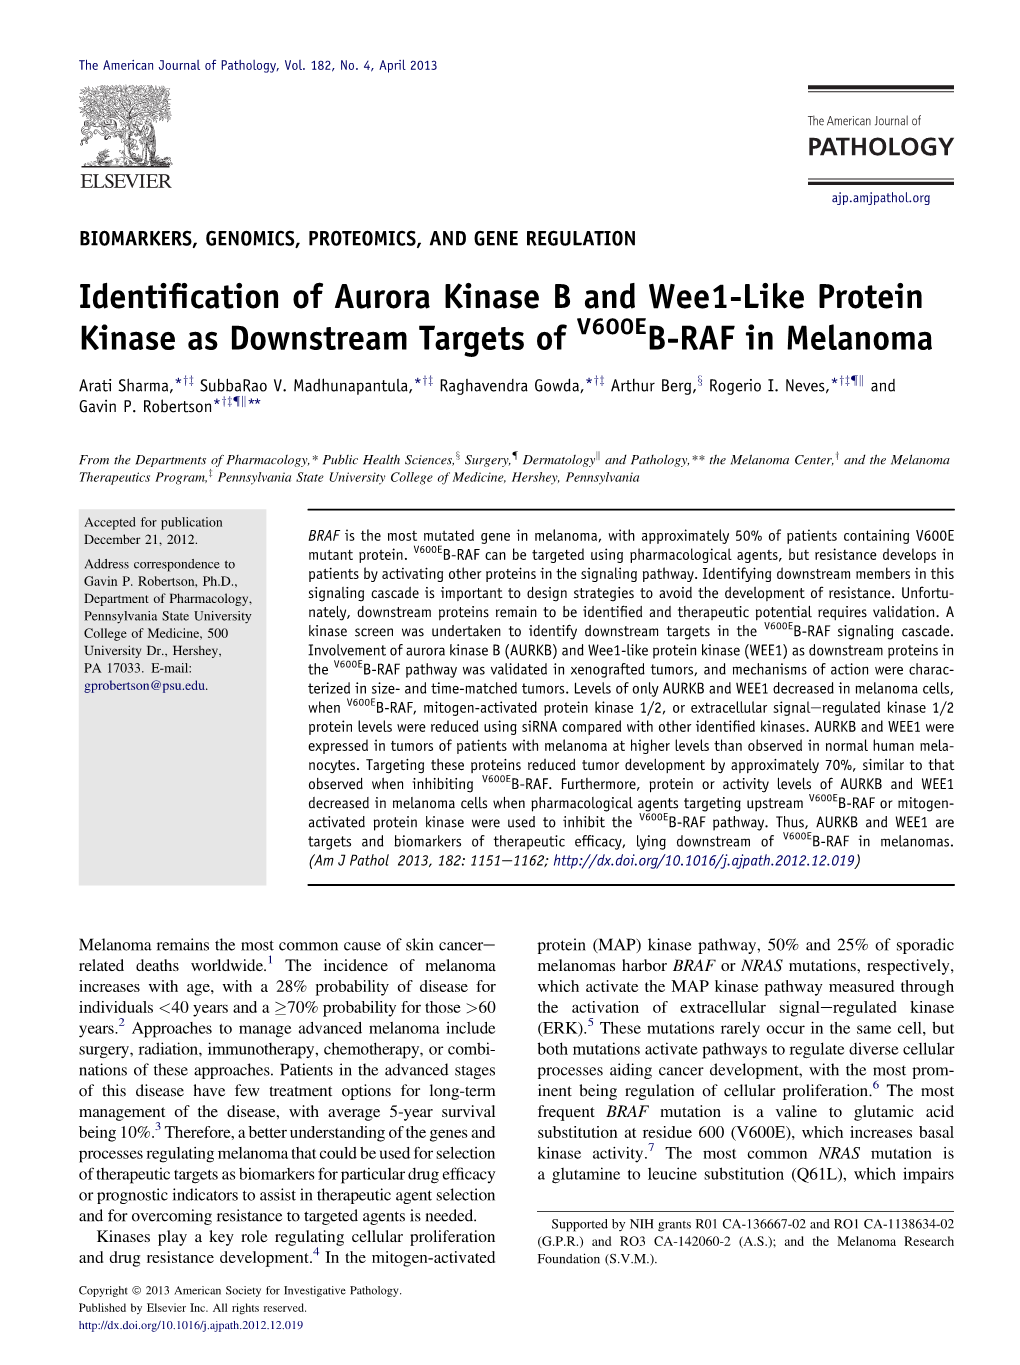 Identification of Aurora Kinase B and Wee1-Like Protein Kinase As